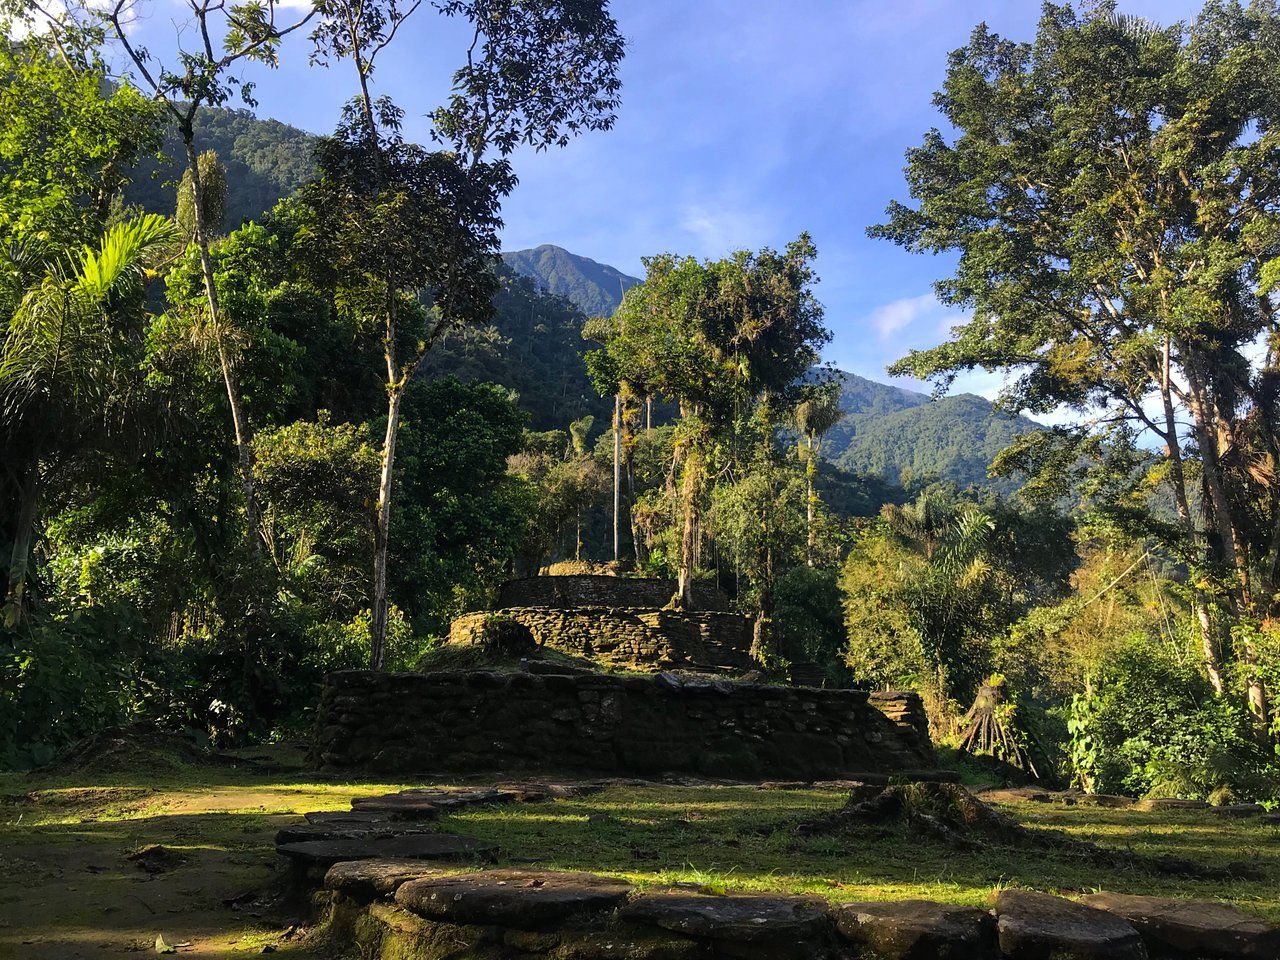 Discover Ancient Treasures at Colombias Lost City